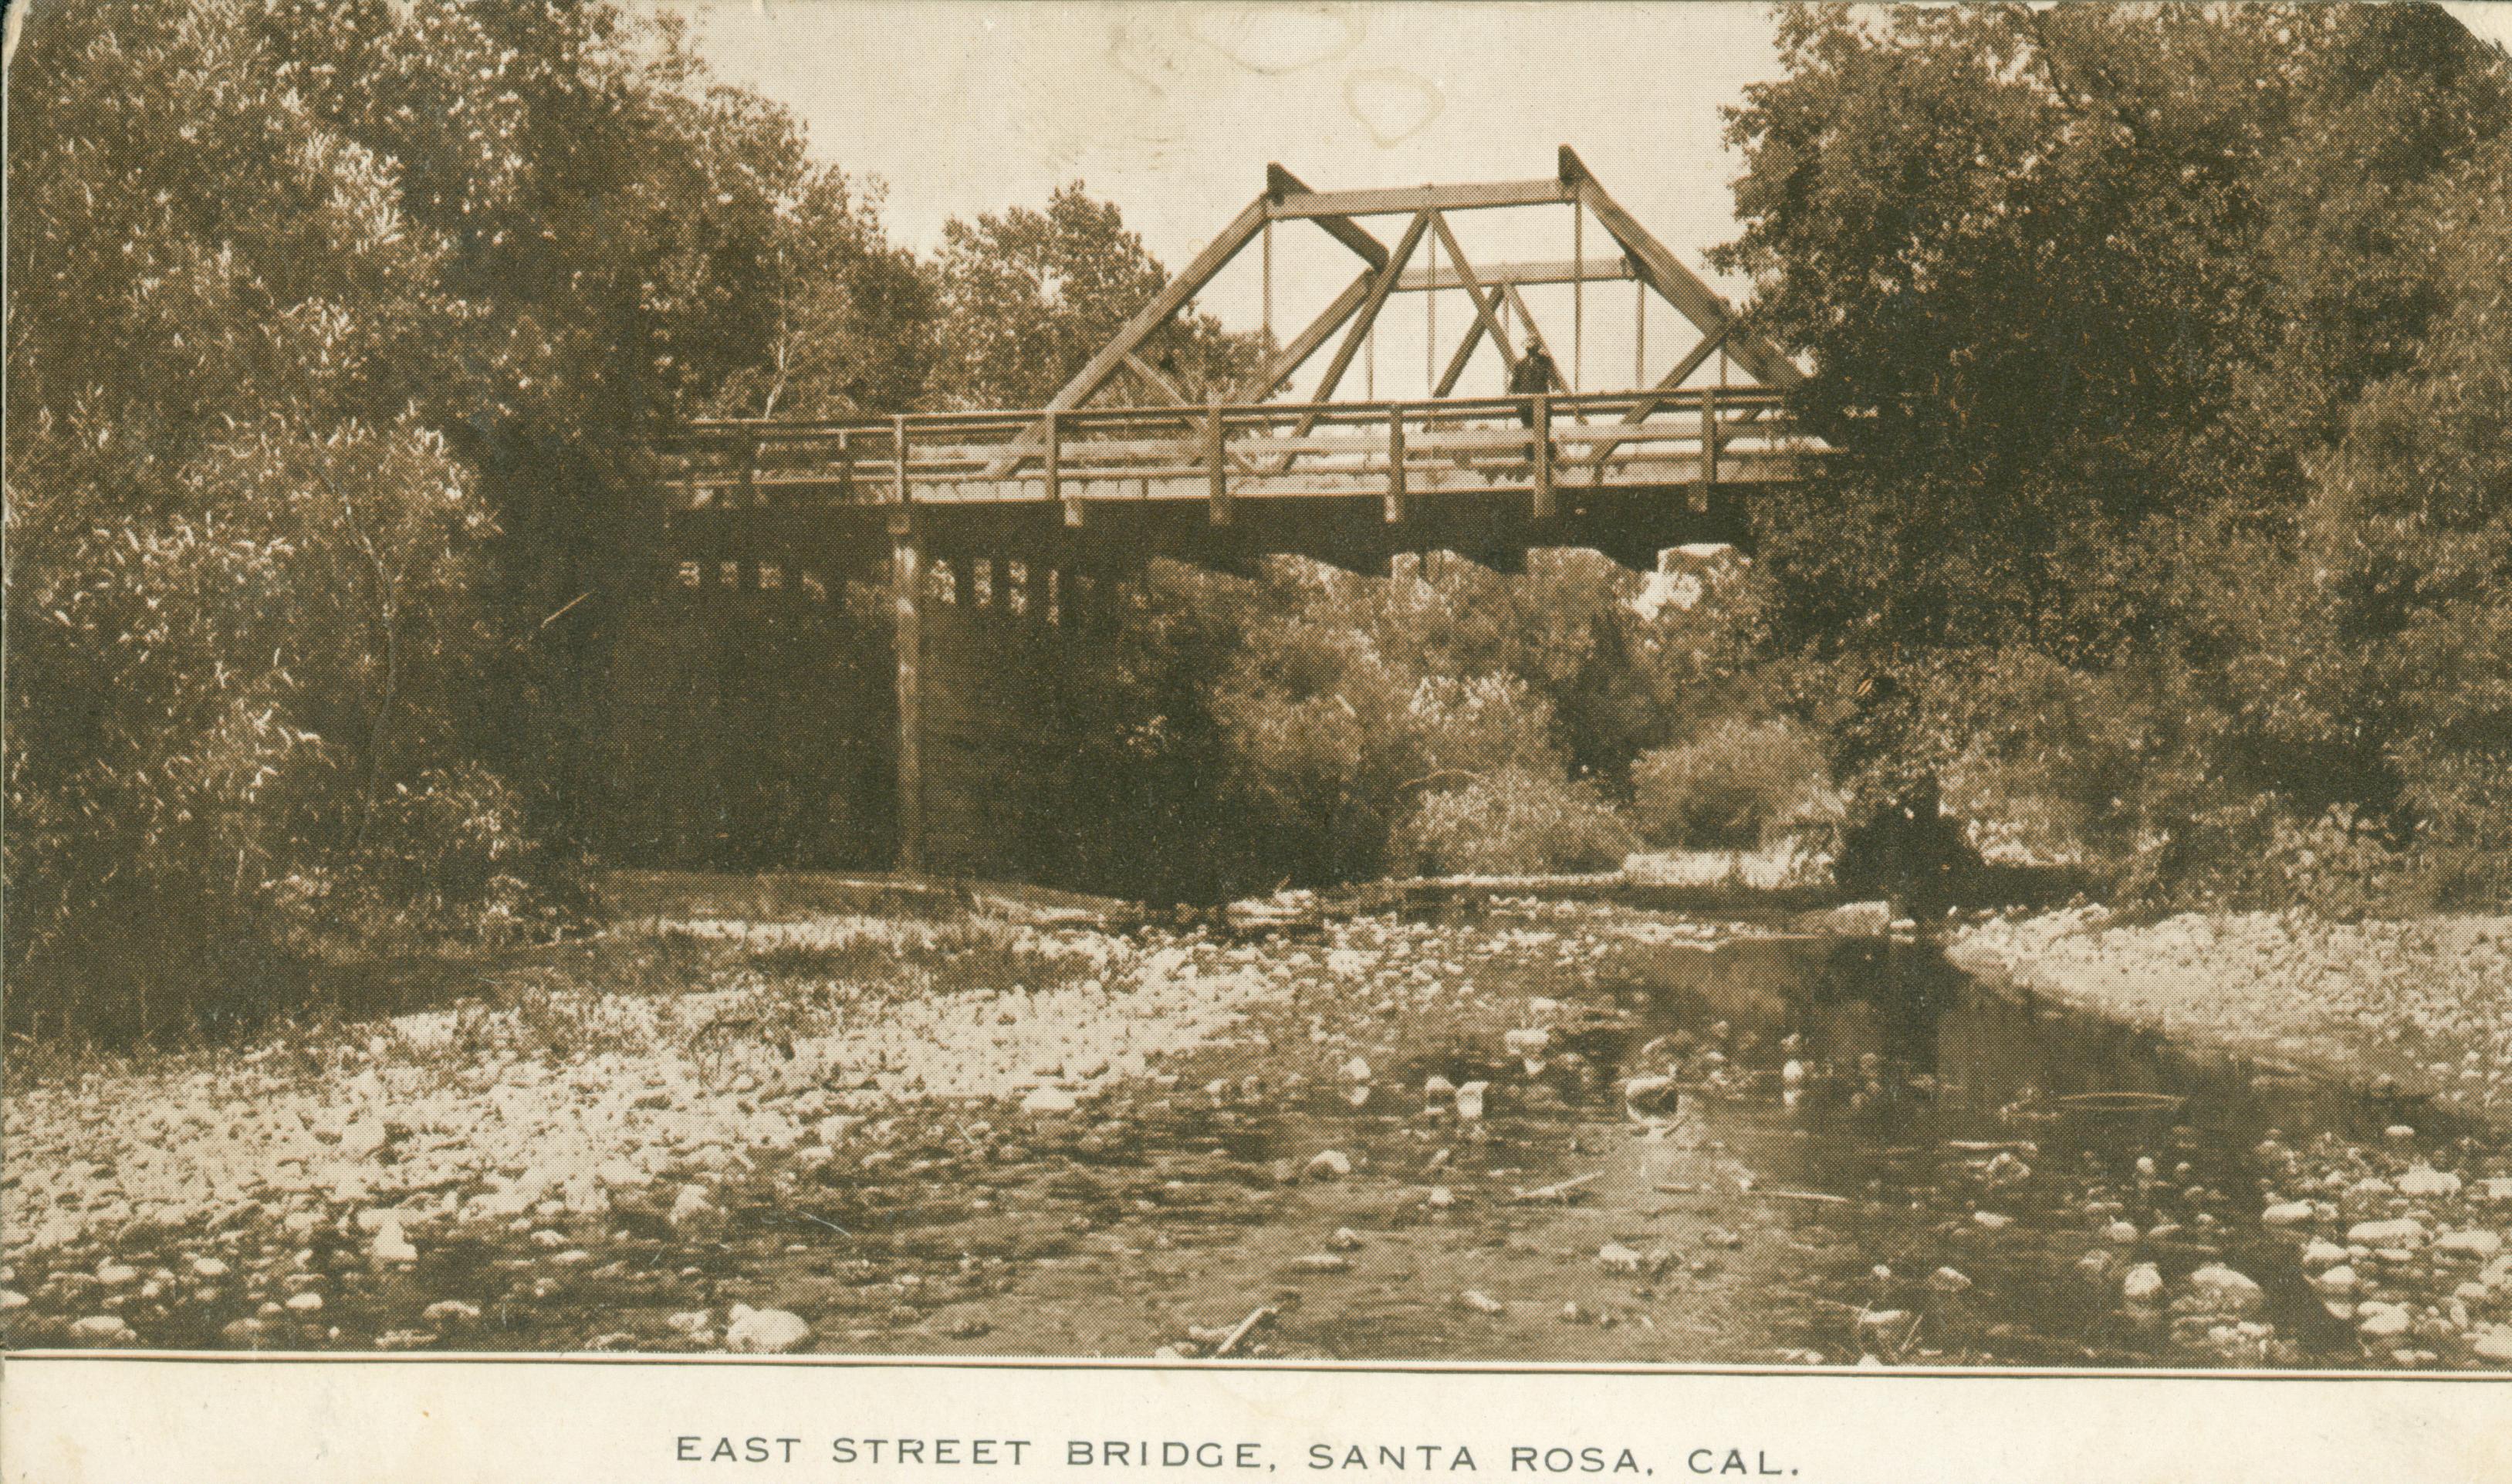 Shows a street bridge spanning a river lined by trees